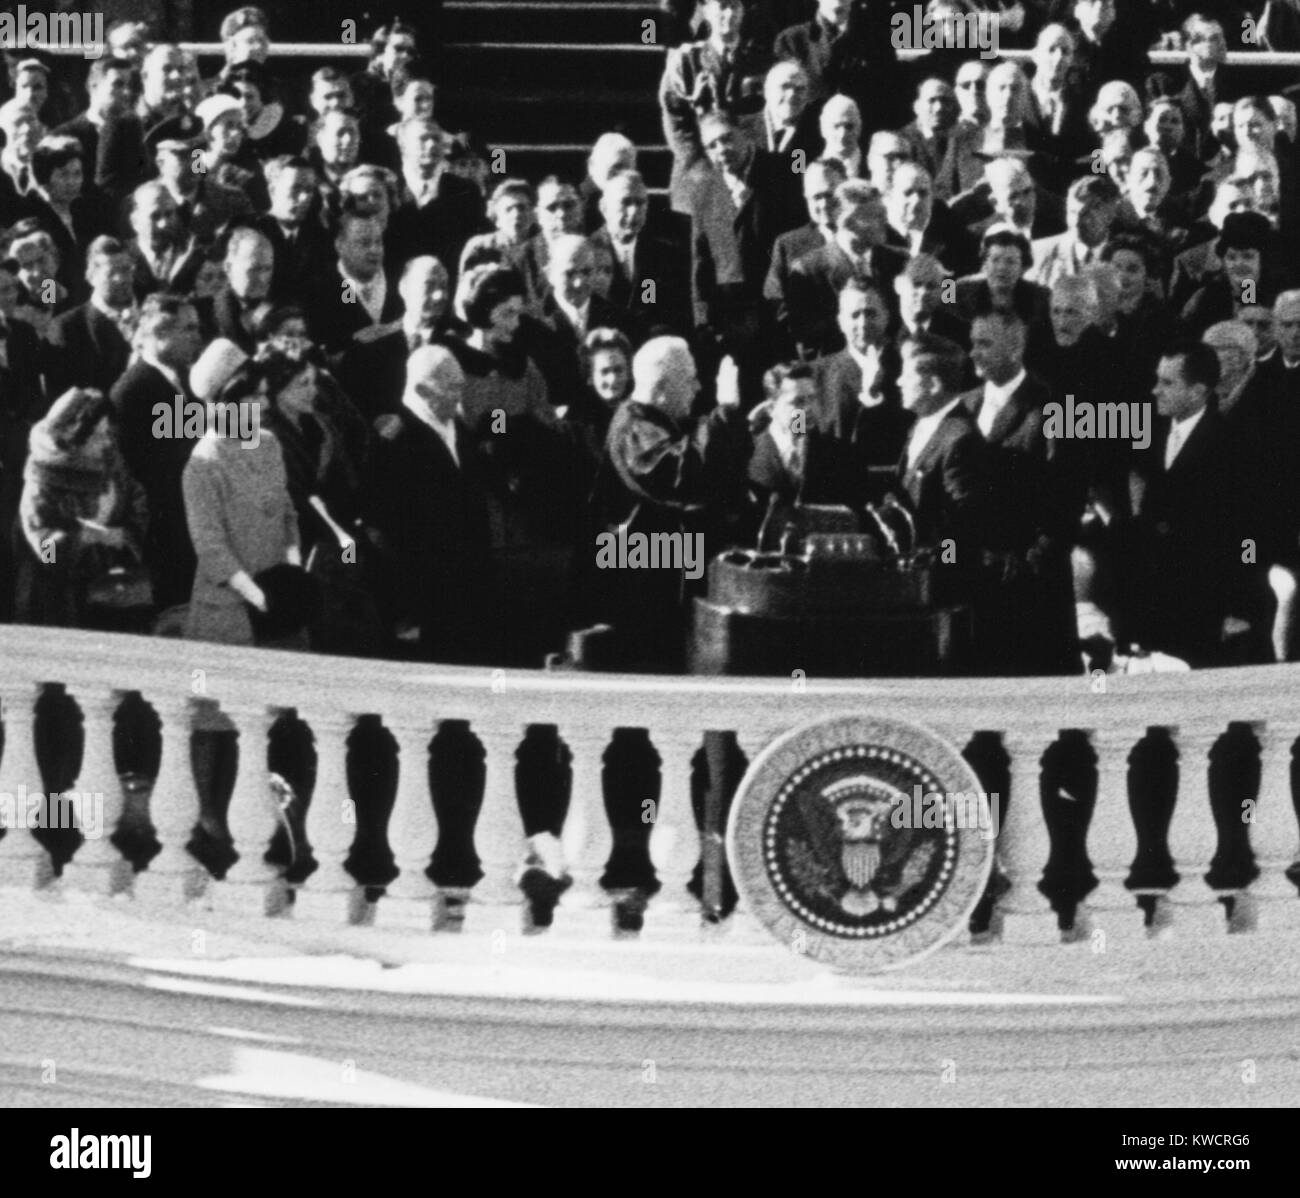 President John Kennedy takes the oath of office administered by Chief Justice Earl Warren. Jan. 20, 1961. - (BSLOC 2015 1 146) Stock Photo